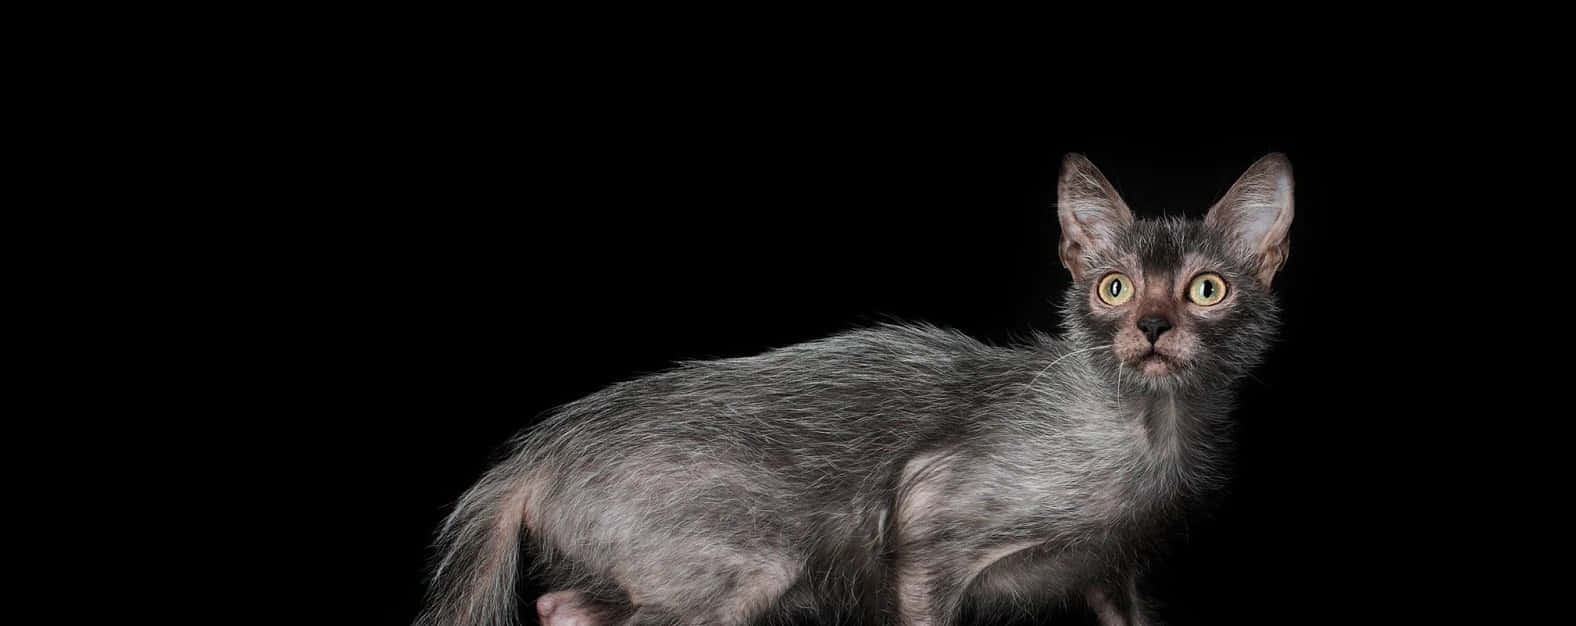 The enigmatic Lykoi cat gazing intently Wallpaper